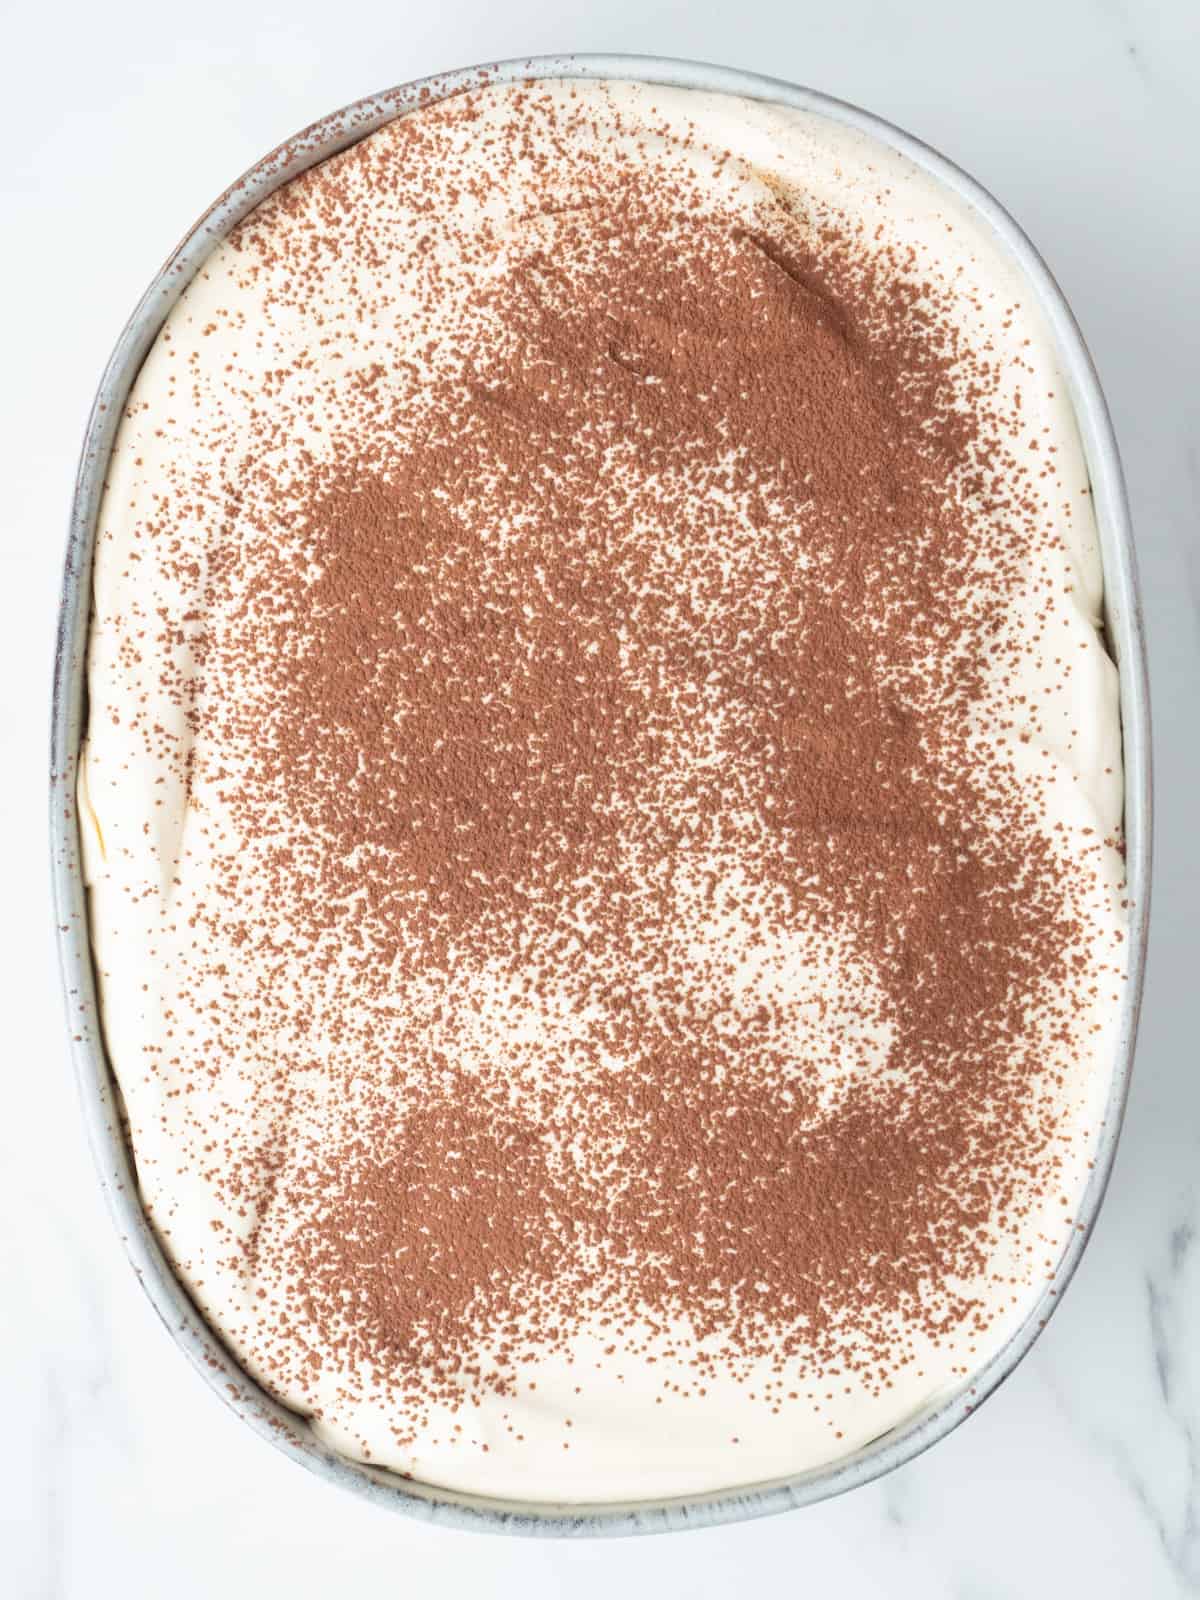 An oval platter with tiramisu, dusted with cocoa powder on the top.